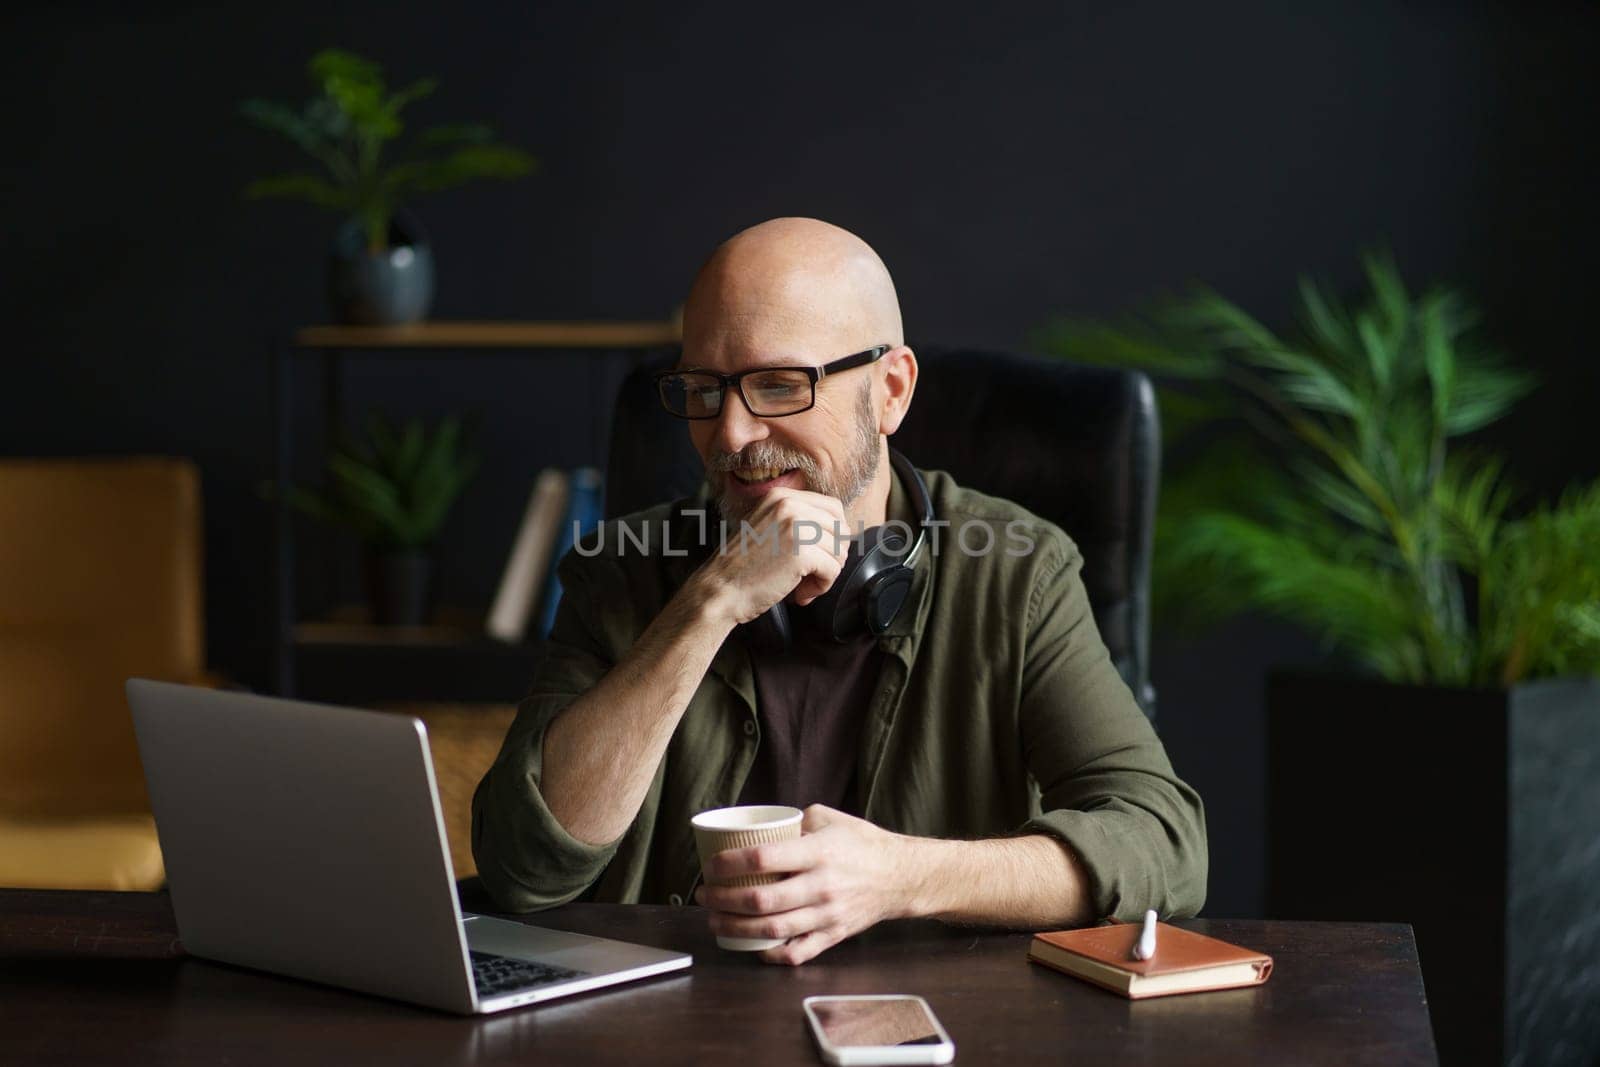 Smiling senior man at home, engrossed in reading news on laptop while holding cup of drink. Enjoying moment of relaxation and staying informed in comfort of his own space. High quality photo